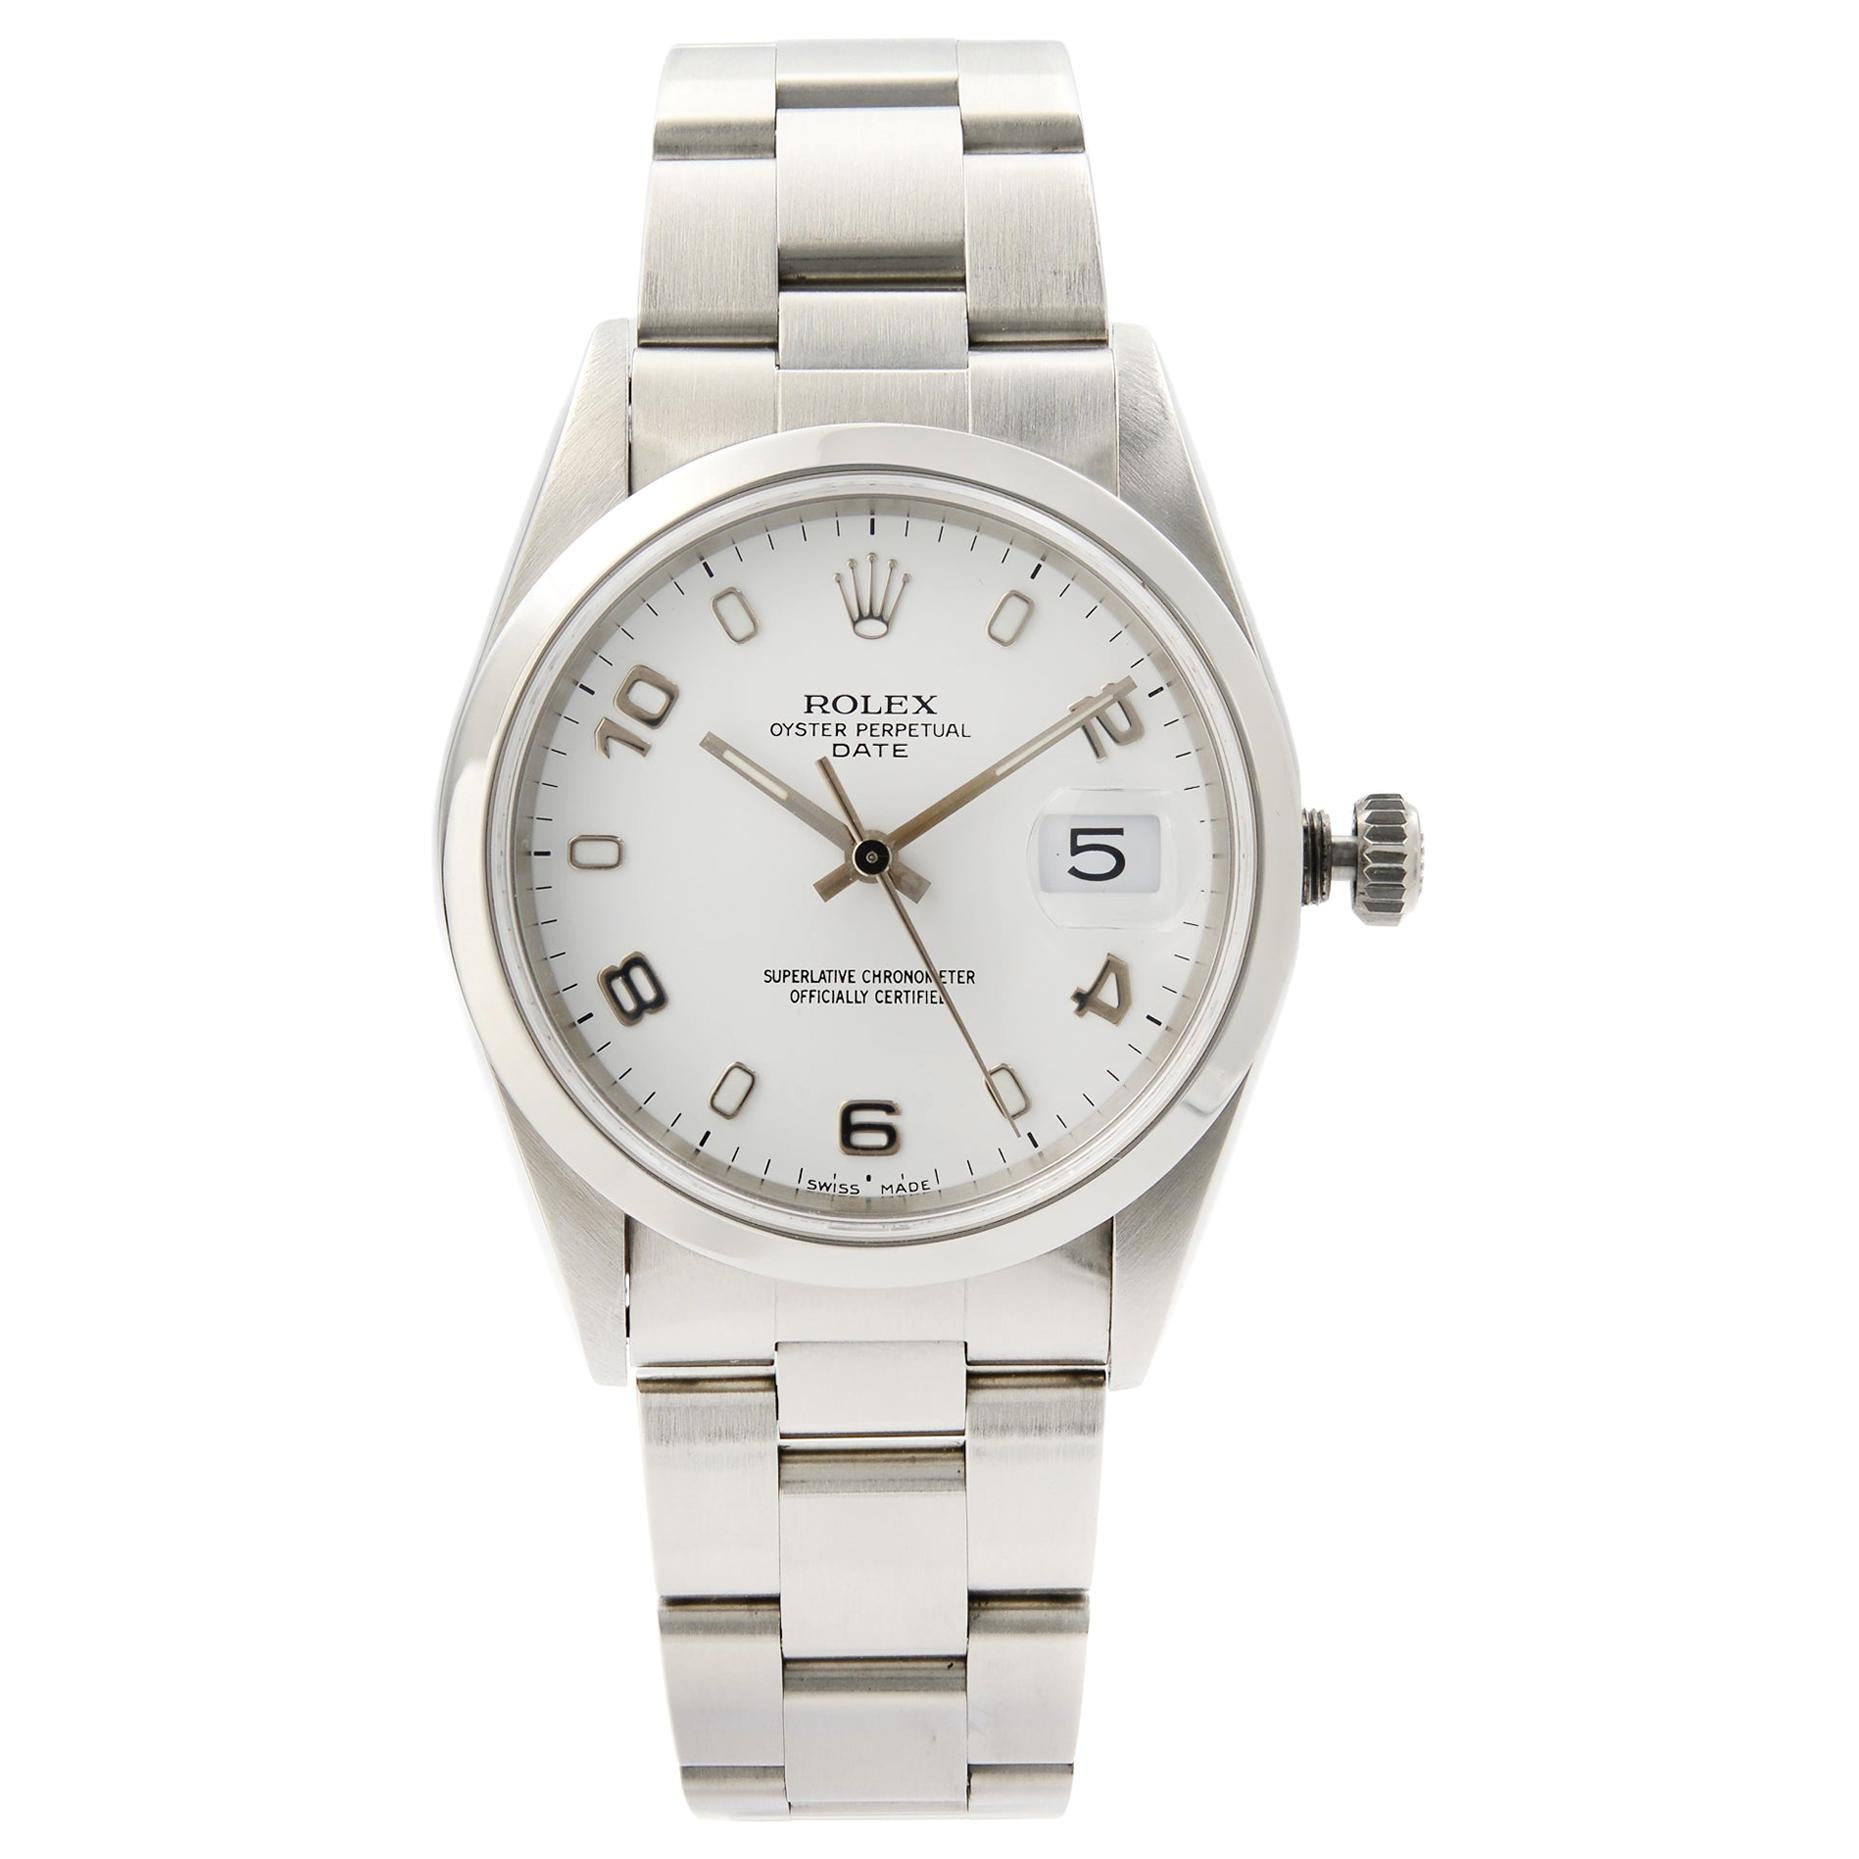 Rolex Oyster Perpetual Date Steel White Arabic Dial Automatic Unisex Watch 15200